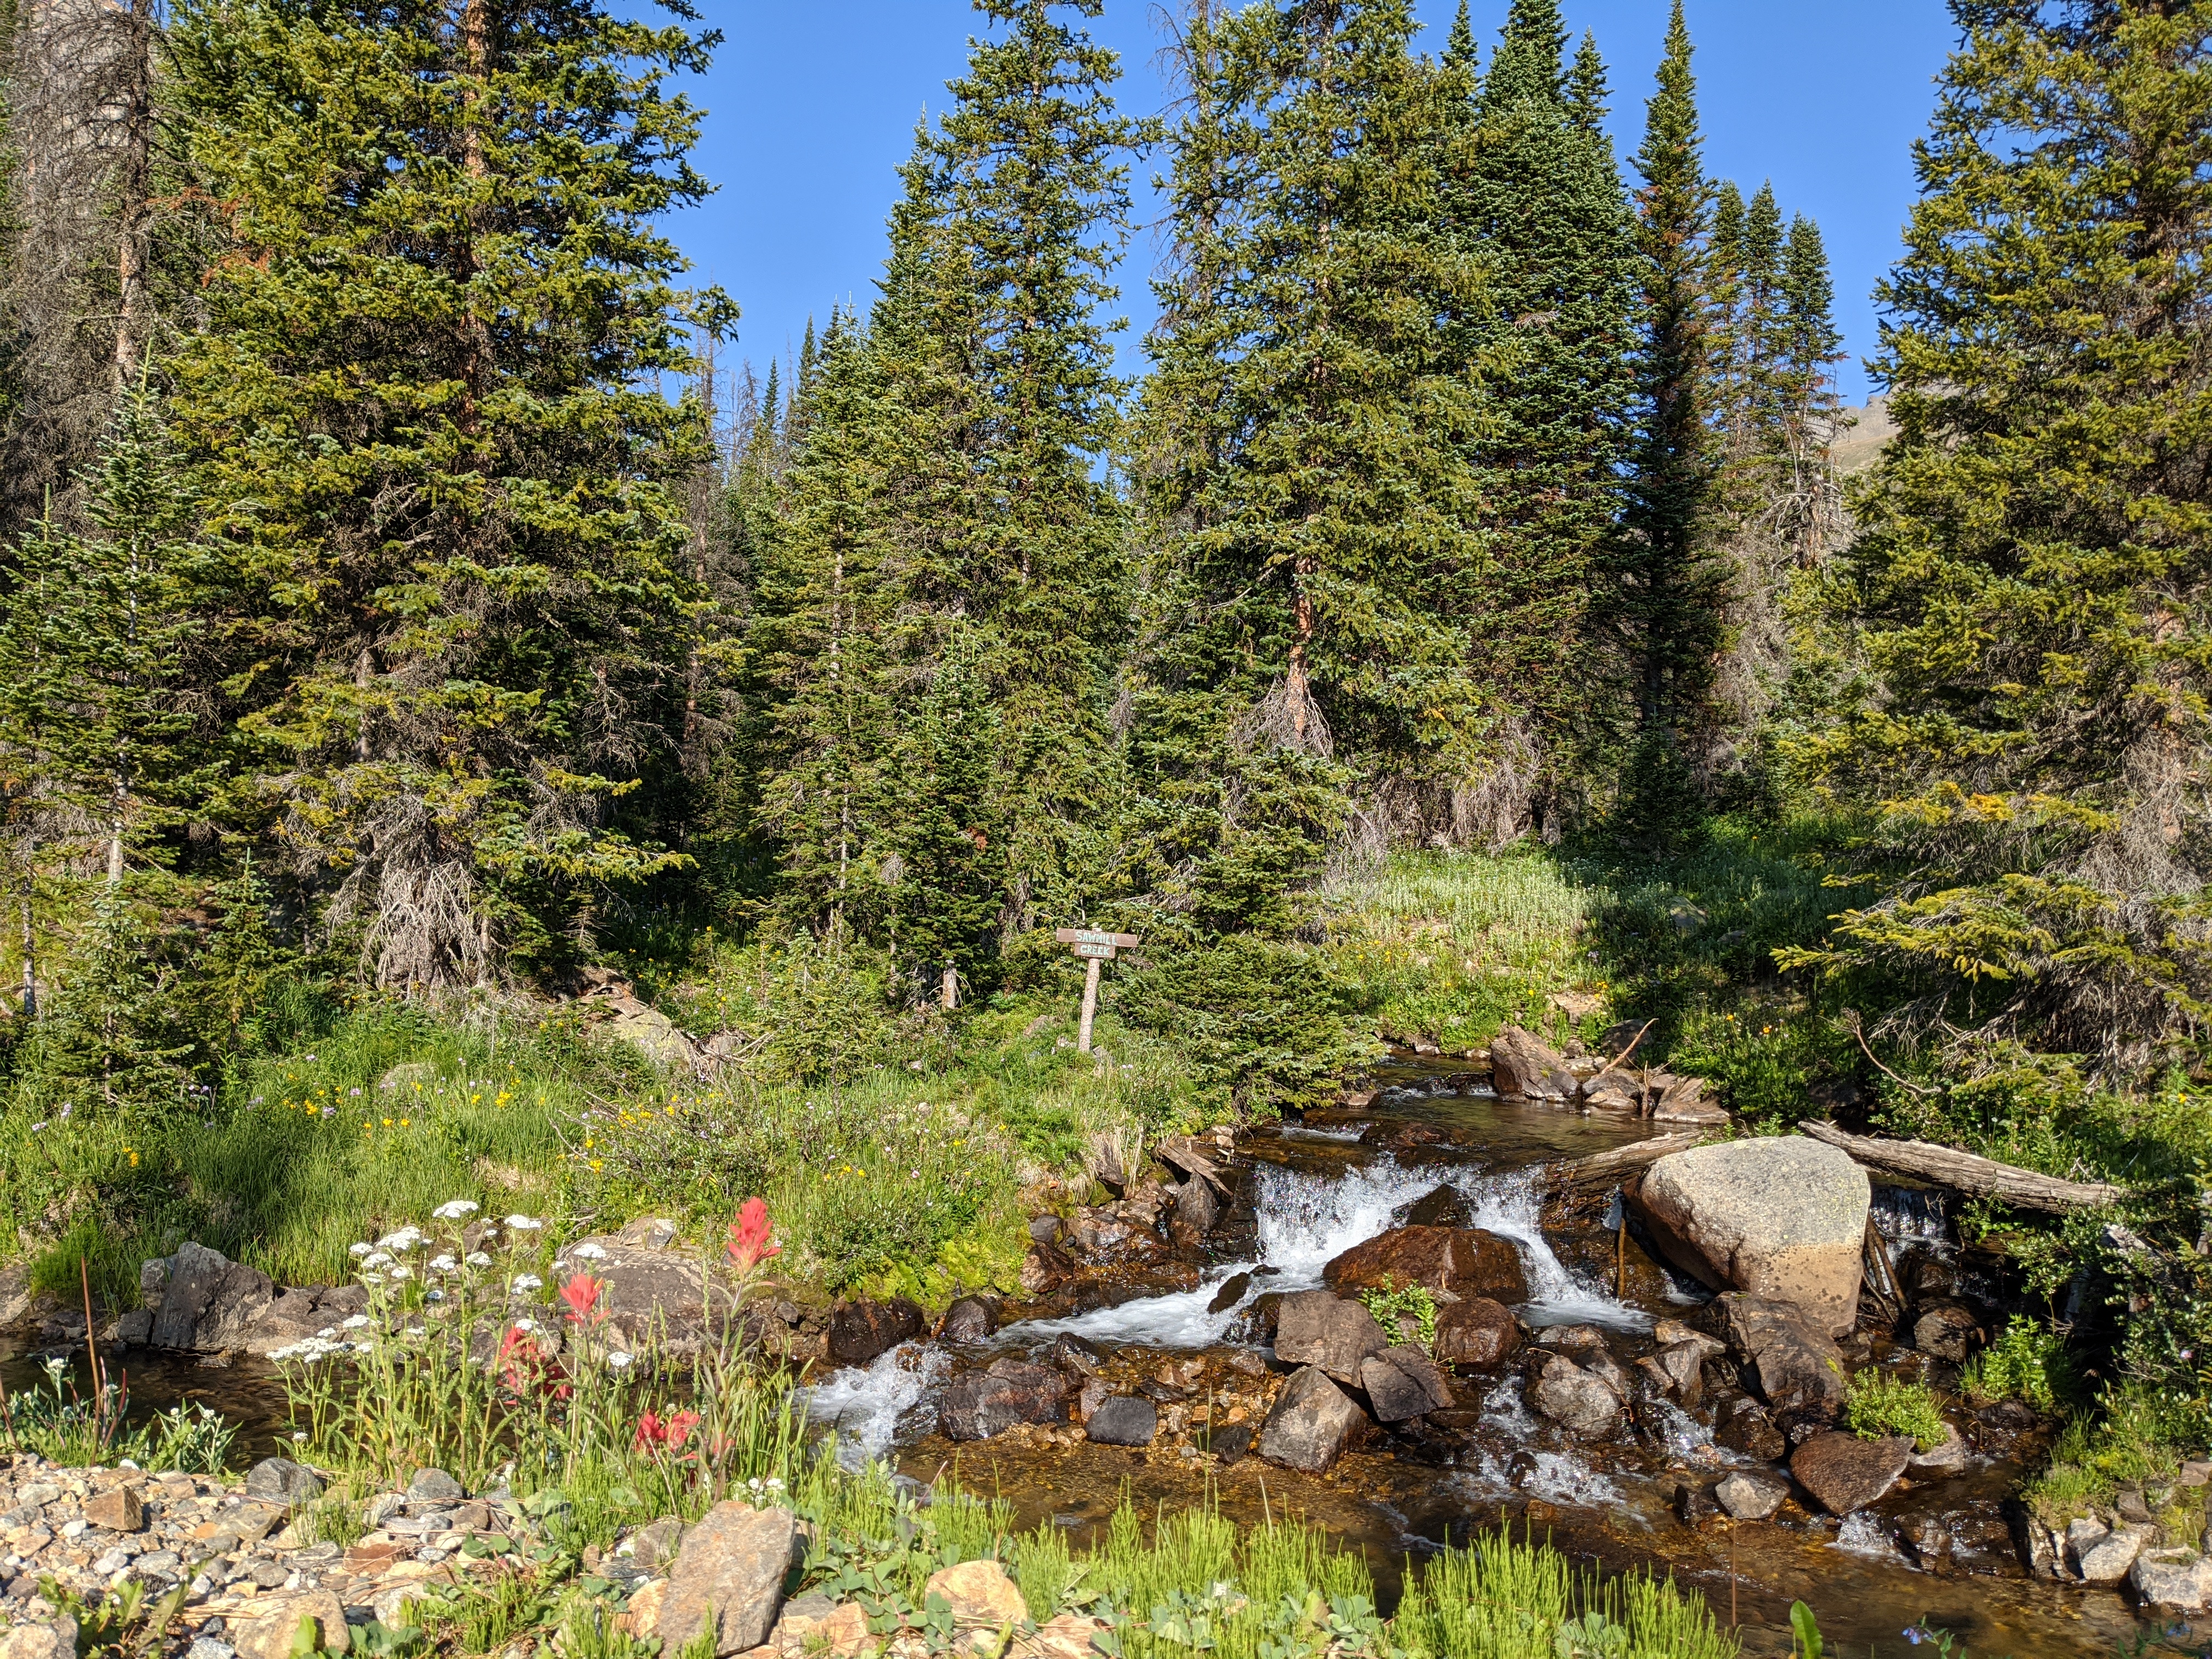 The entrance to Sawmill Creek in the Rocky Mountain National Park Wilderness.